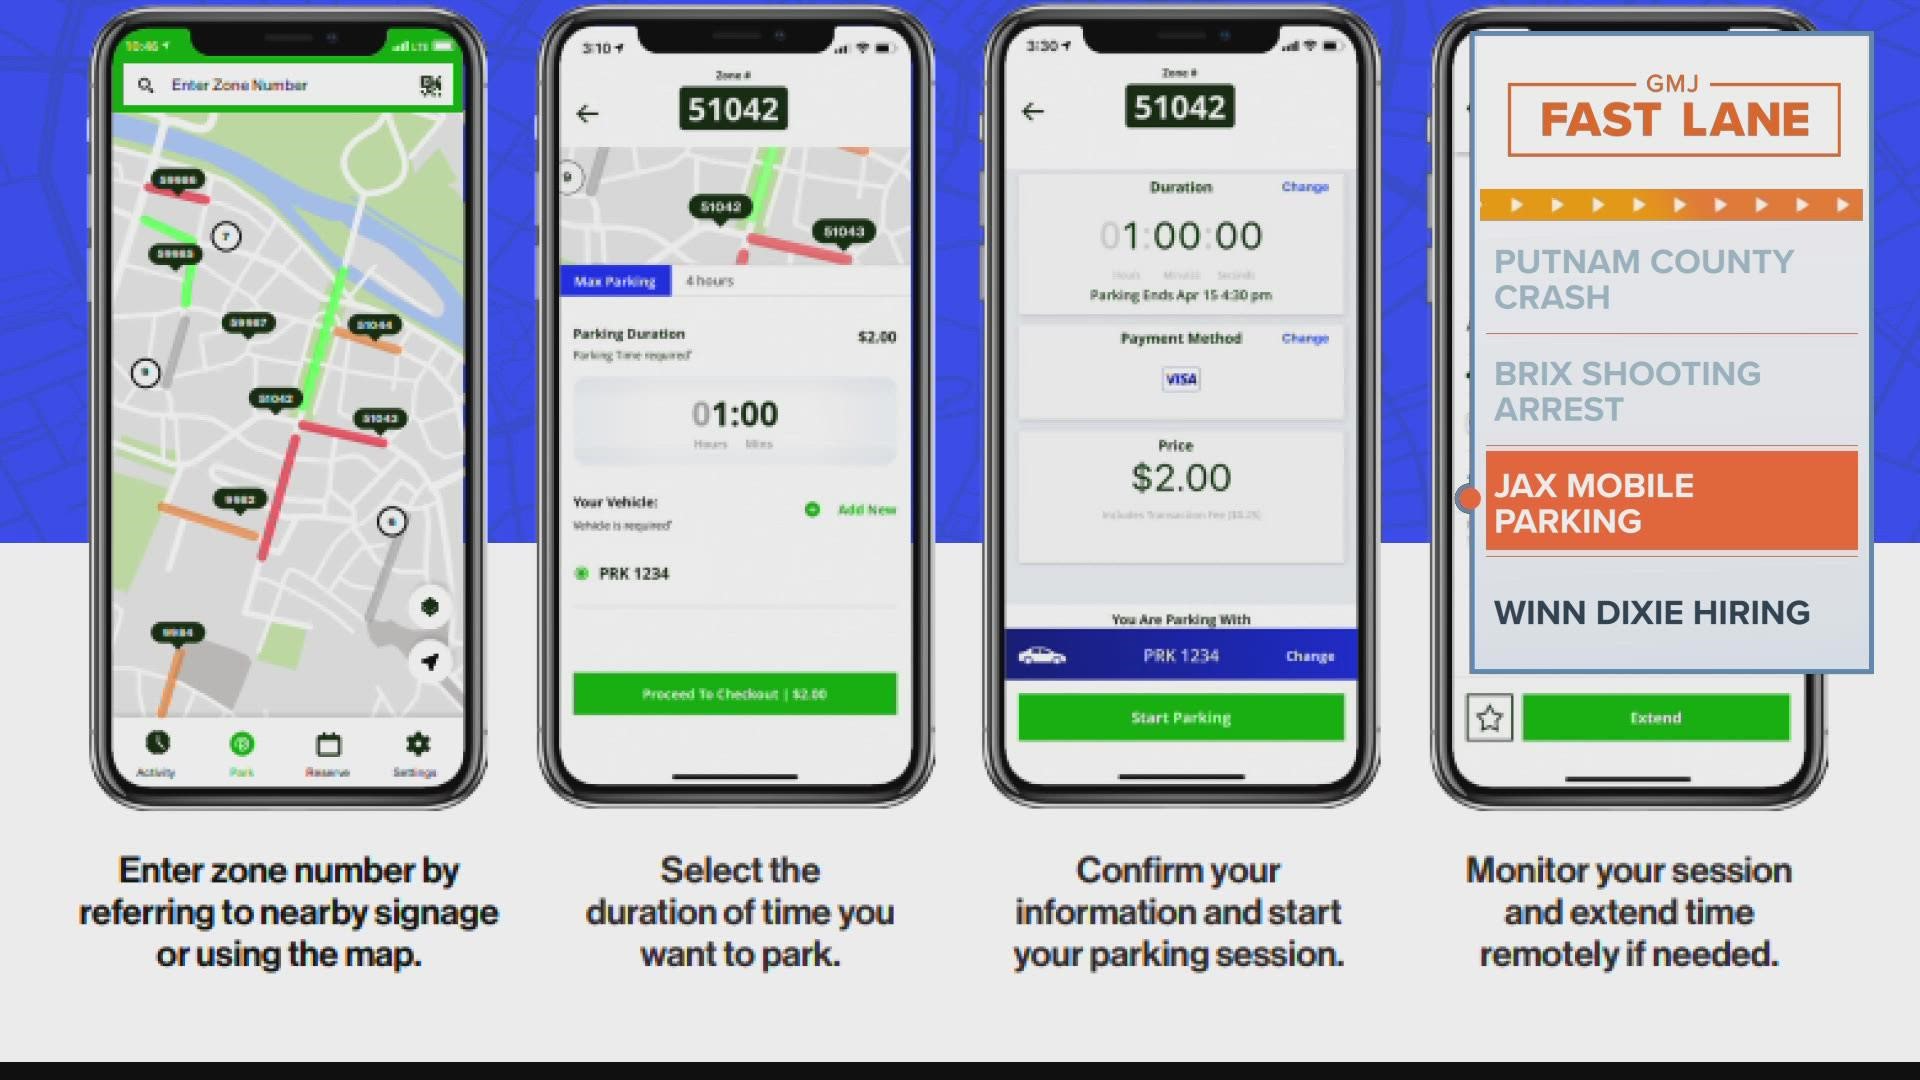 Mobile pay will be available through the ParkMobile app as of Monday.